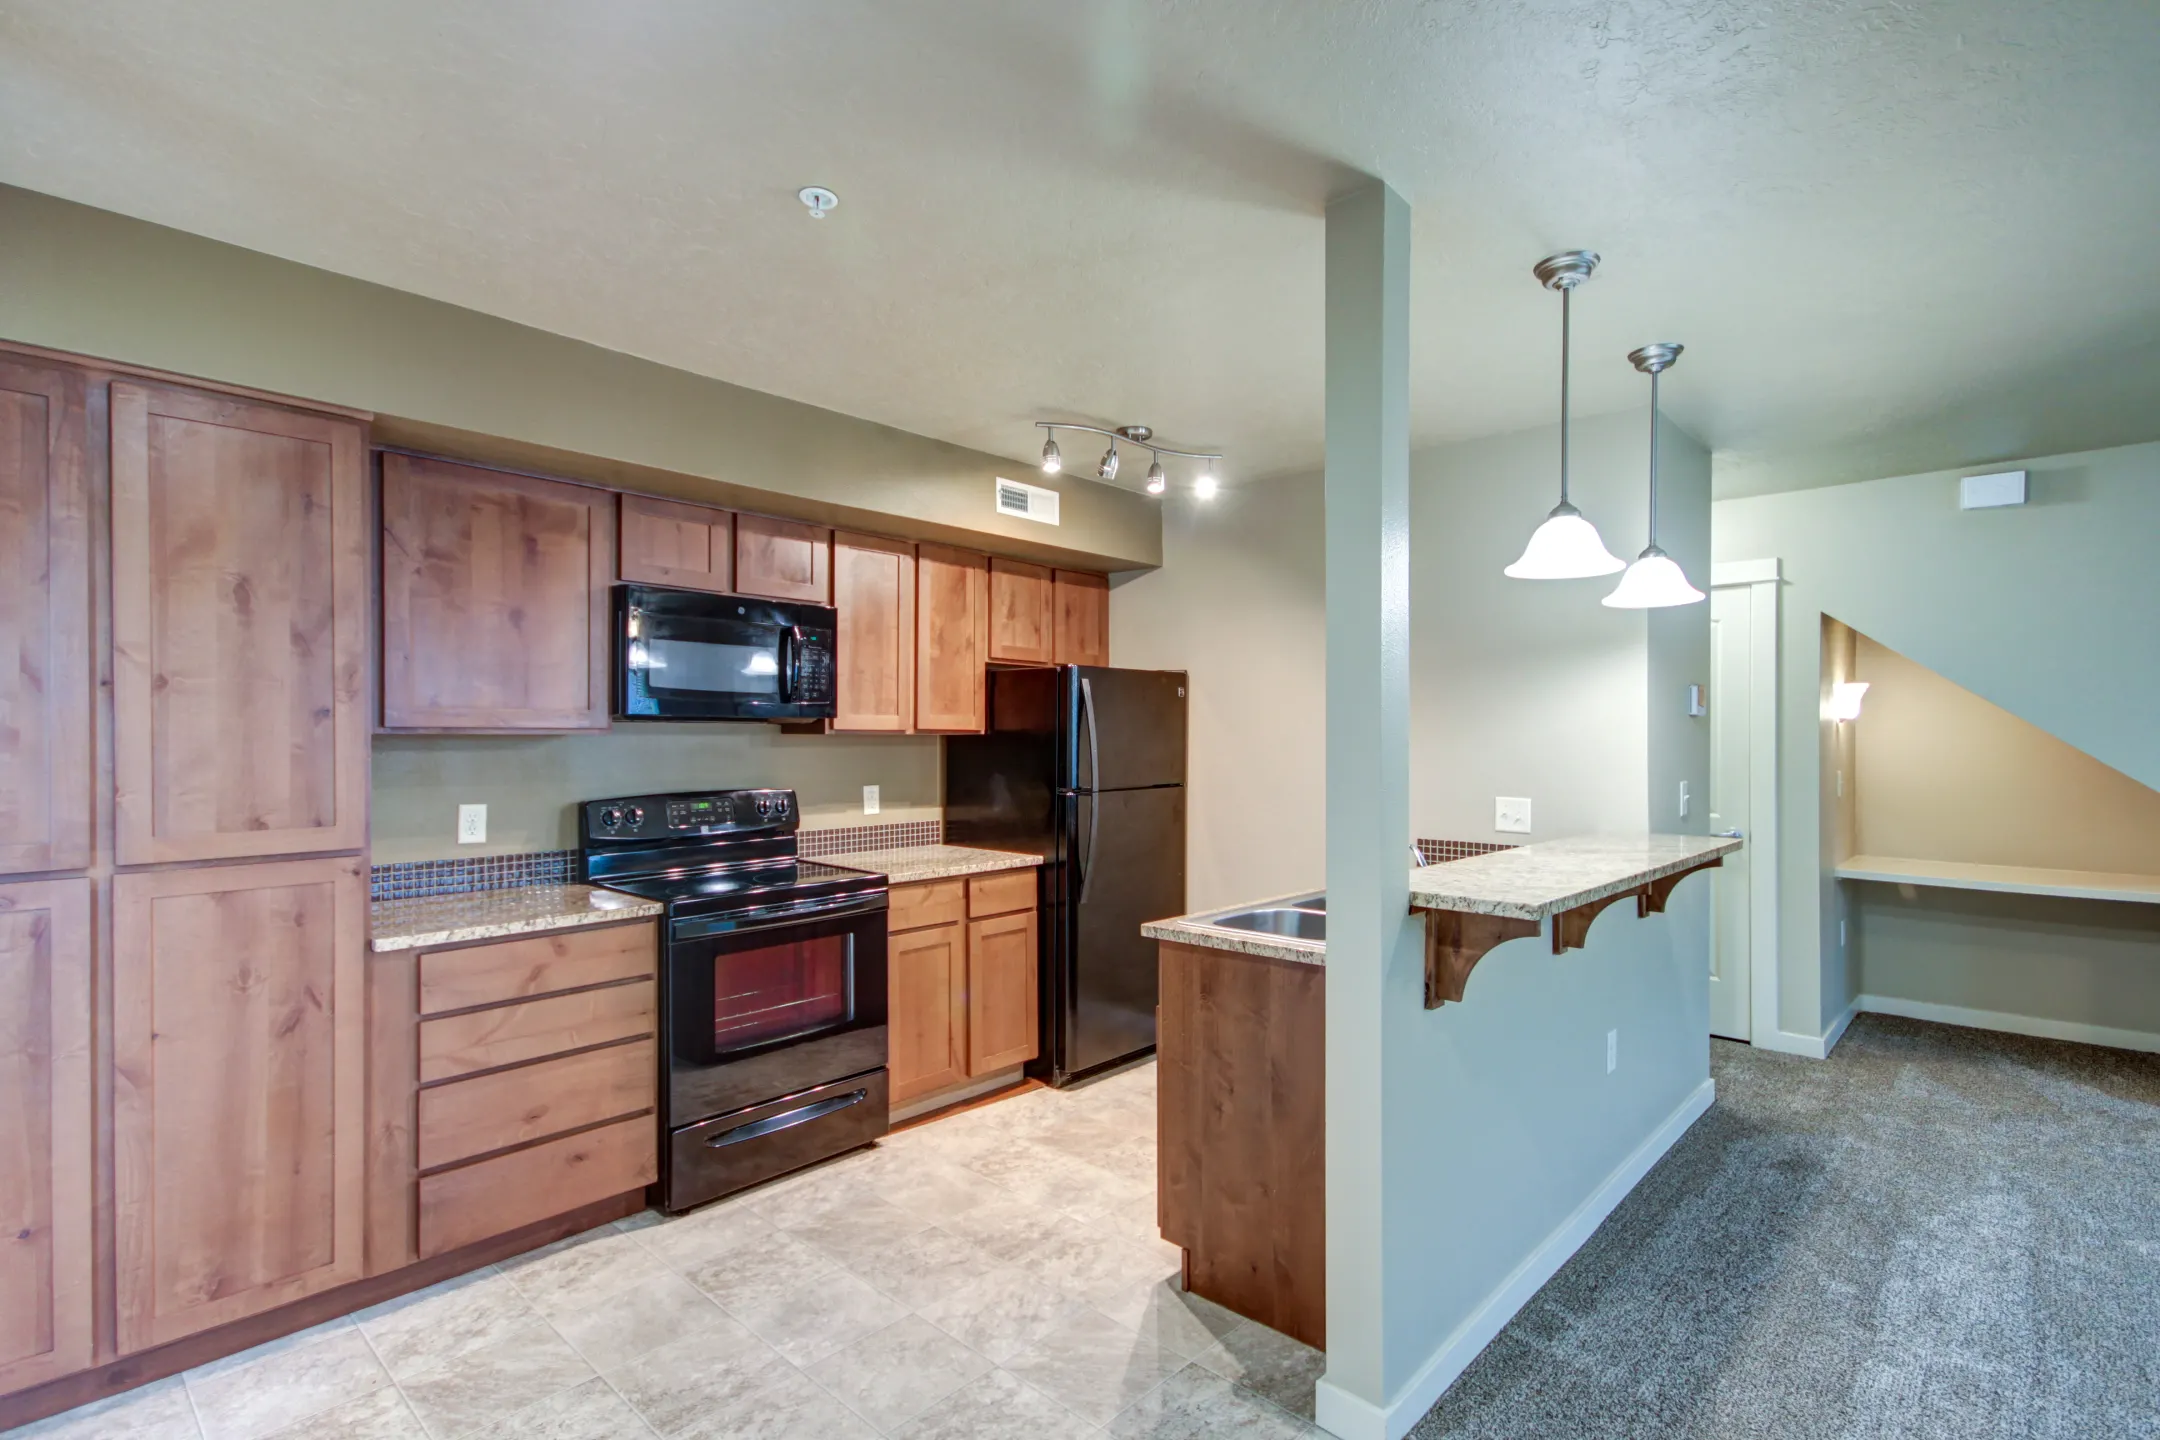 Kitchen - Cantabria Townhomes - Boise, ID